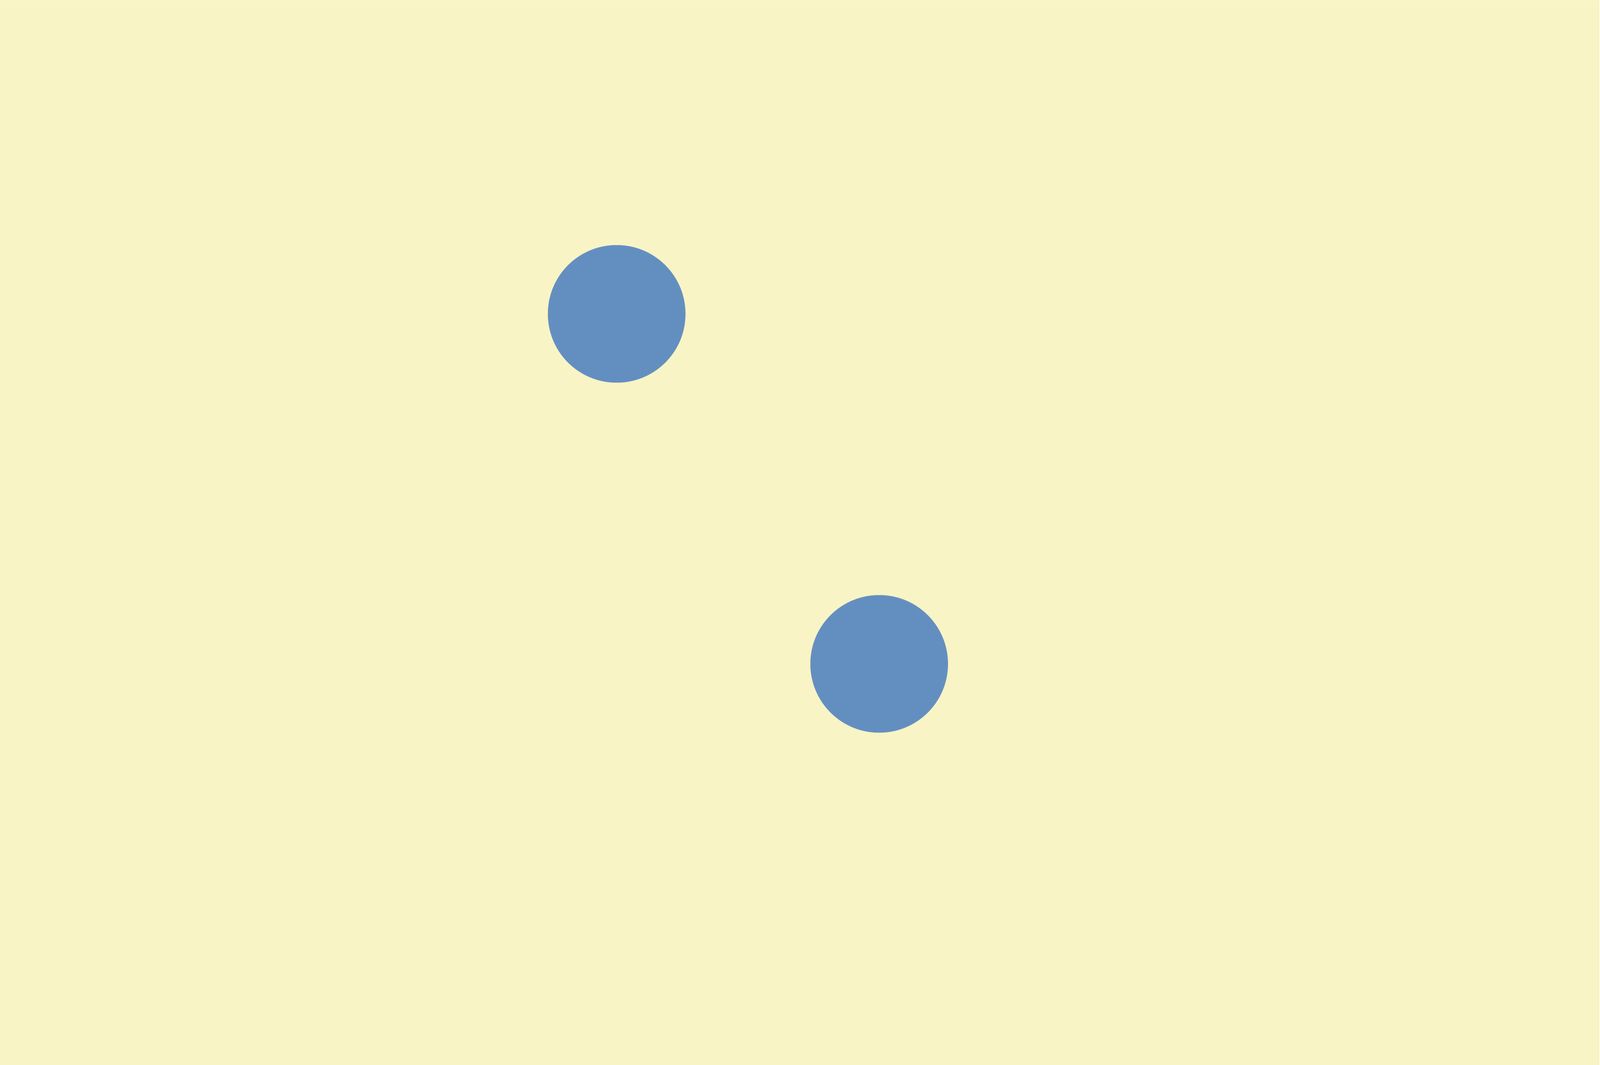 two blue dots on a yellow background misaligned